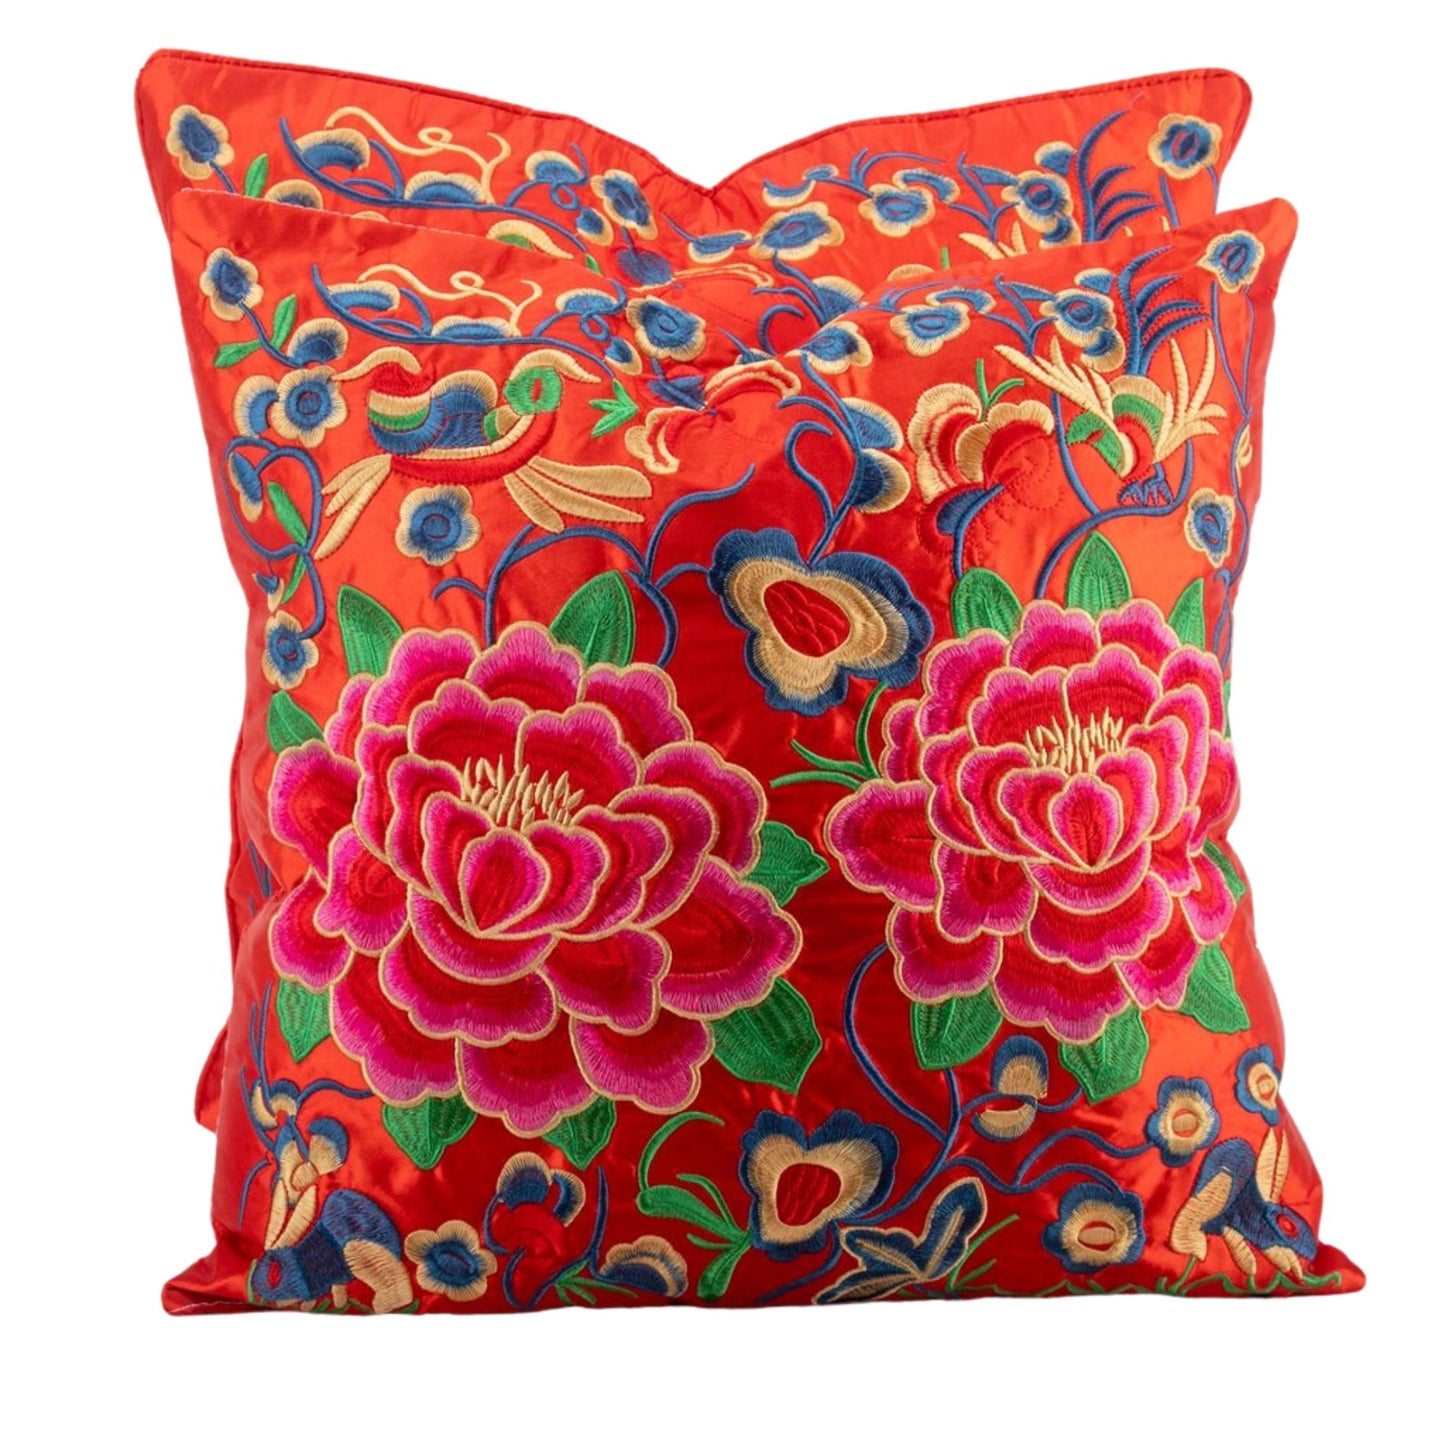 NEW - Pink & Orange, 20x20" Silk Peony Floral, Embroidered Pillow W/ Insert